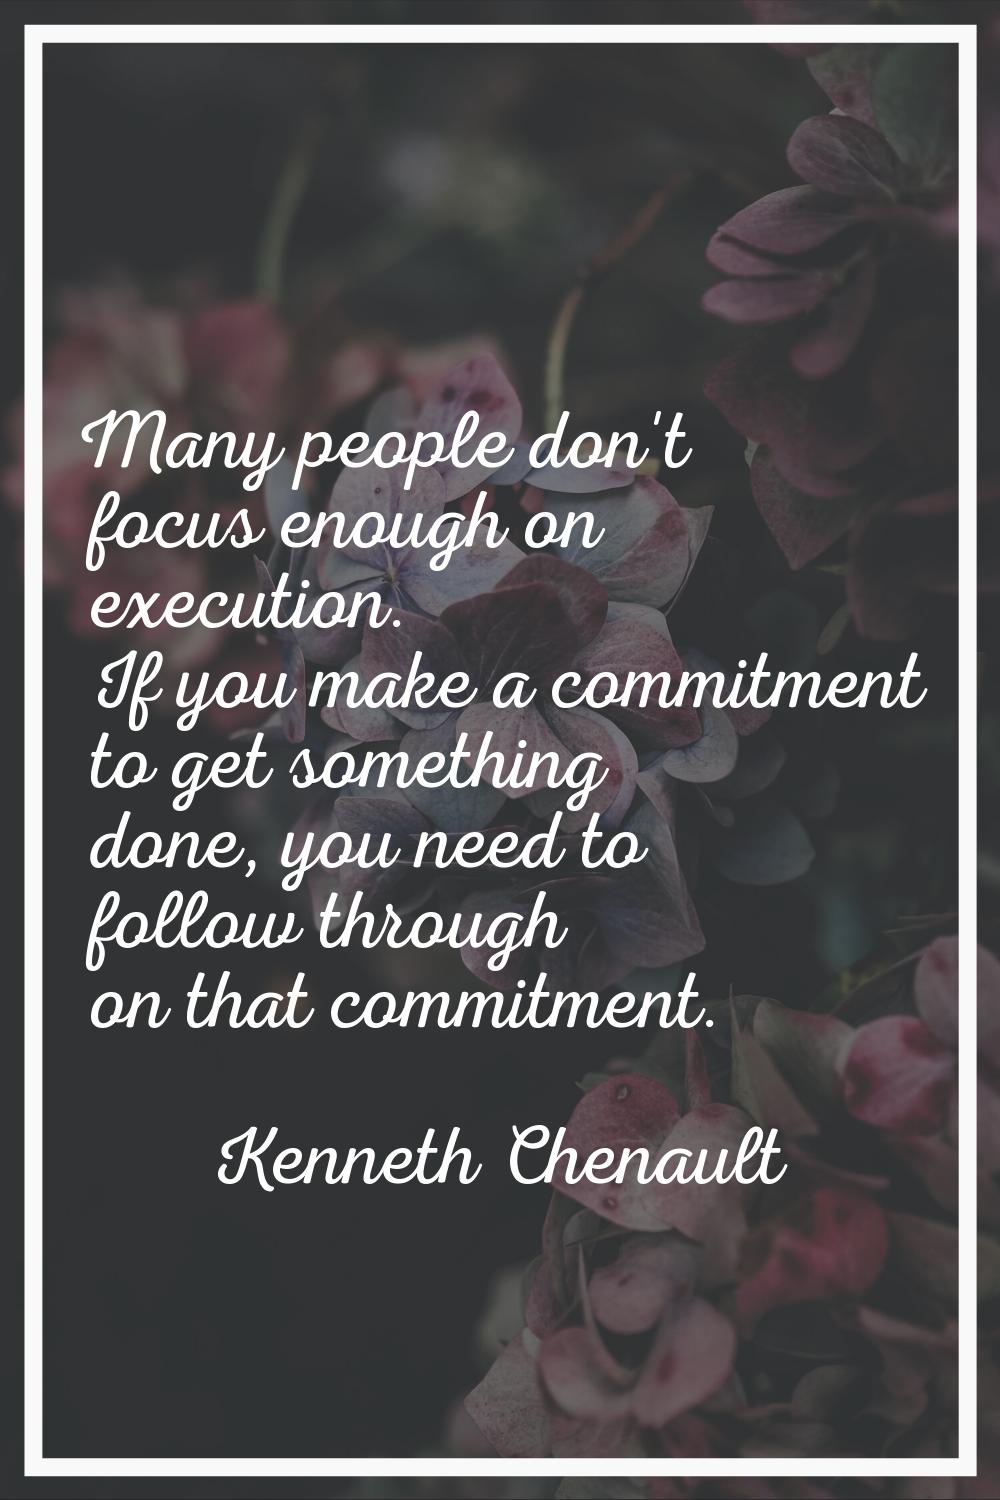 Many people don't focus enough on execution. If you make a commitment to get something done, you ne